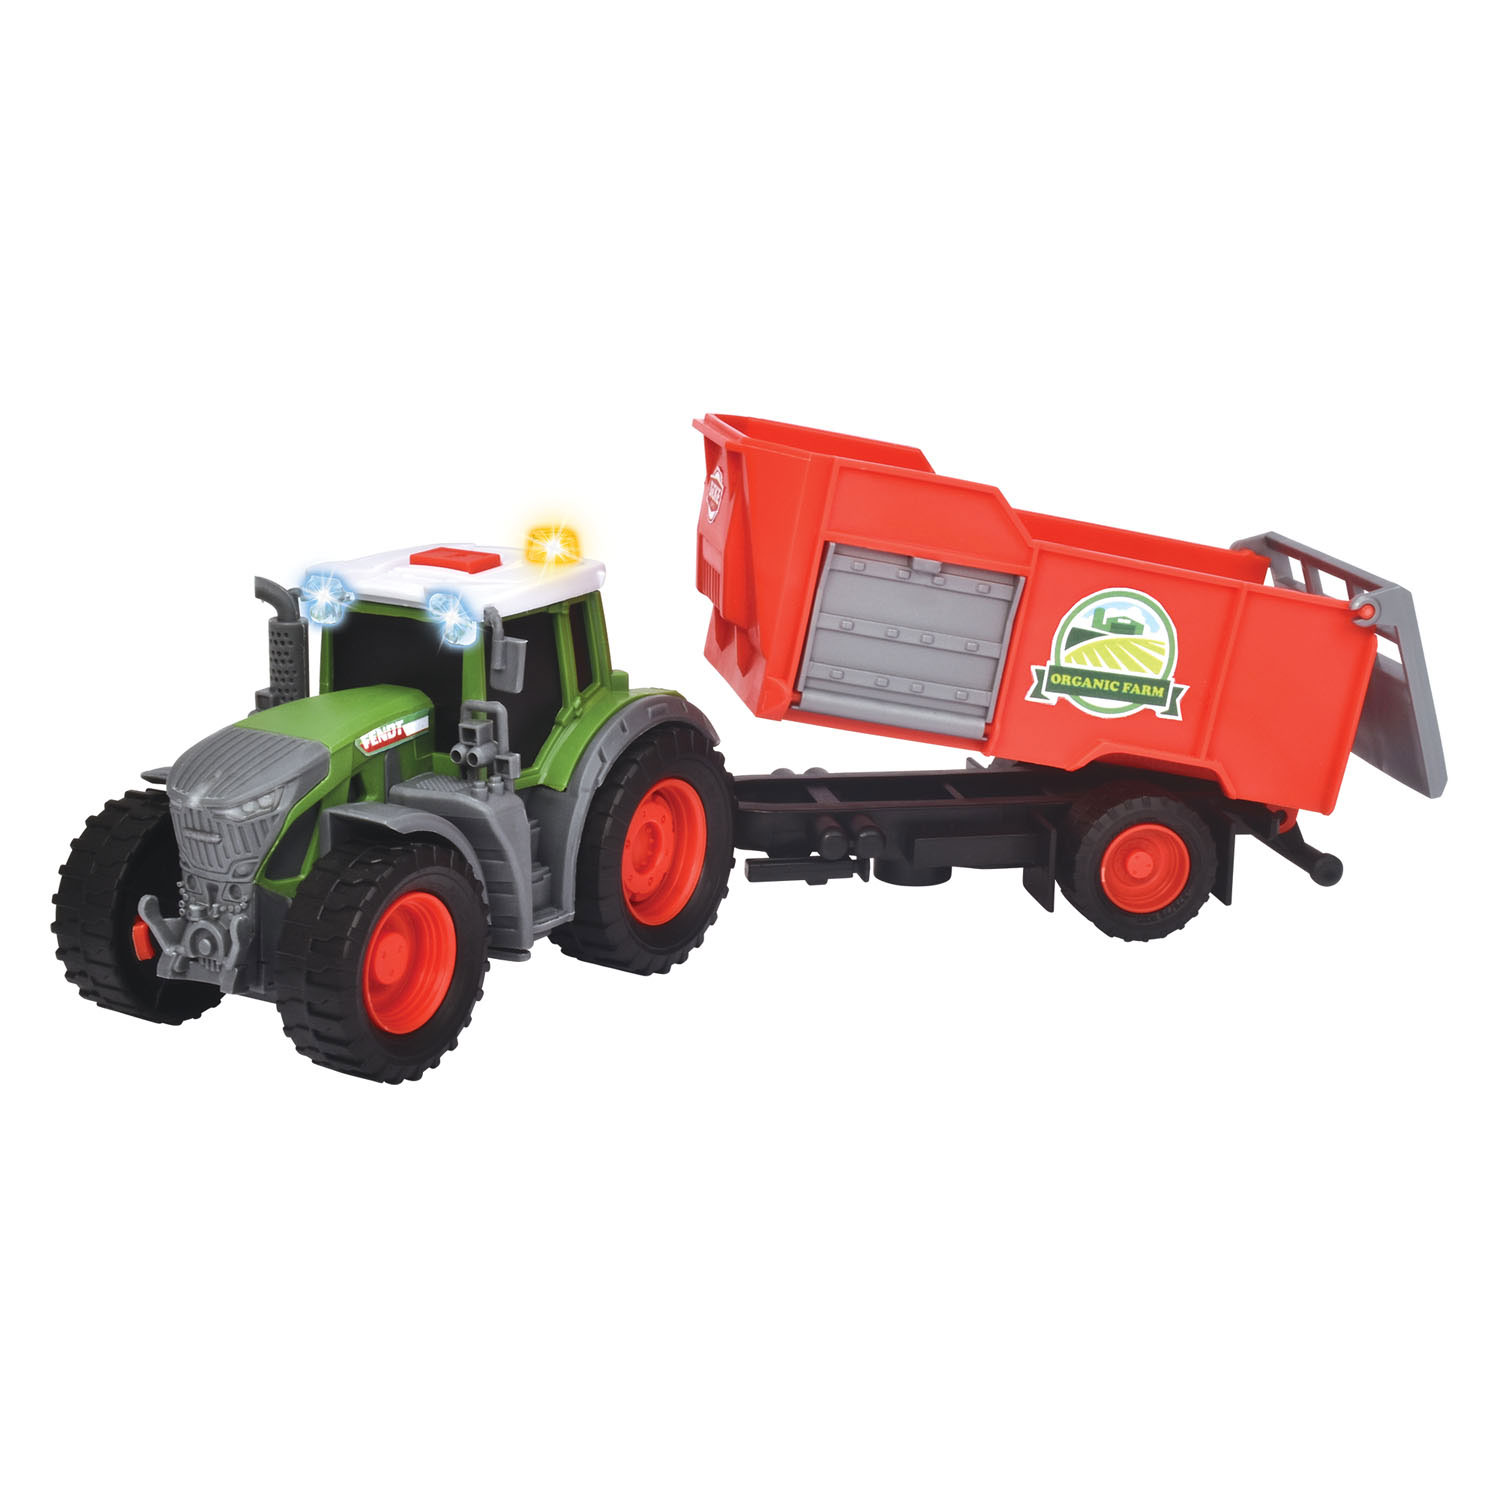 Dickie Fendt Tractor | Thimble Toys